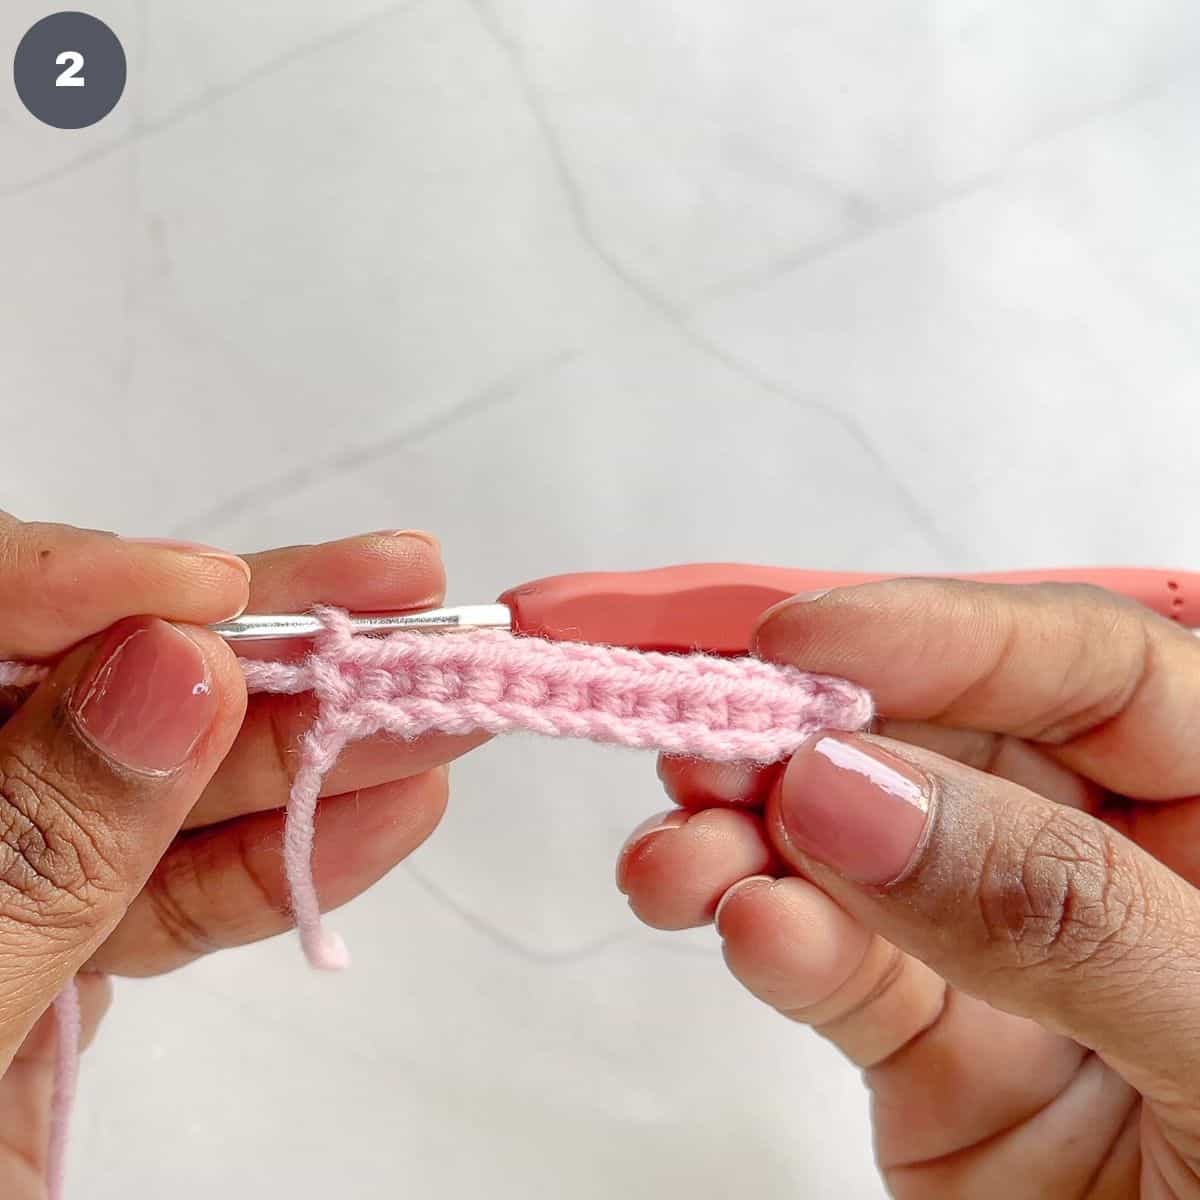 A row of single crochet stitches in pink yarn.